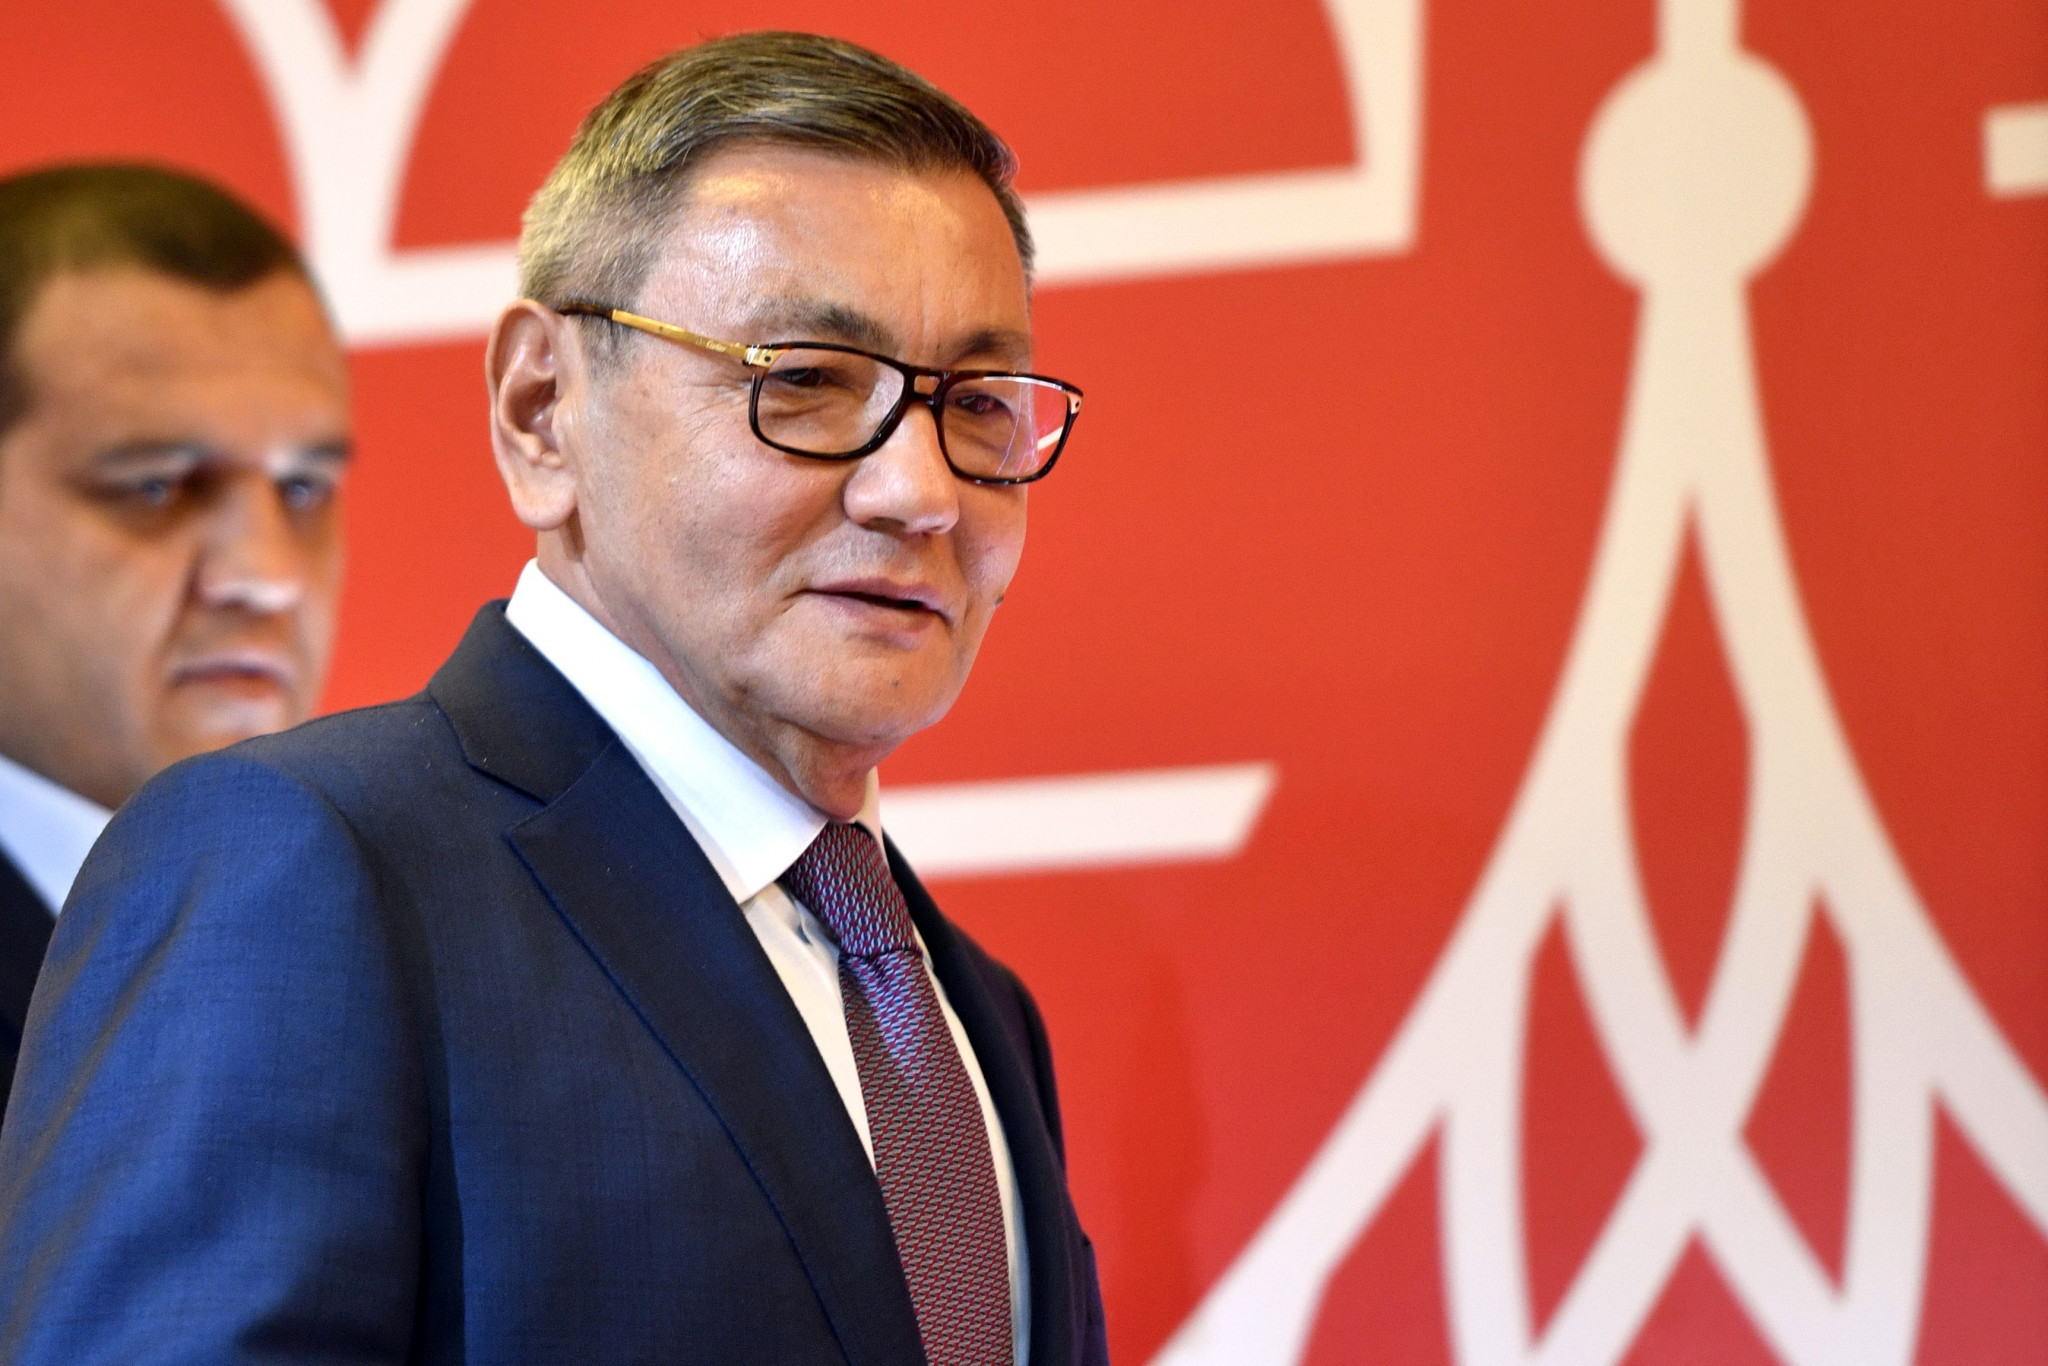 Gafur Rakhimov is to stand aside as AIBA President ©Getty Images